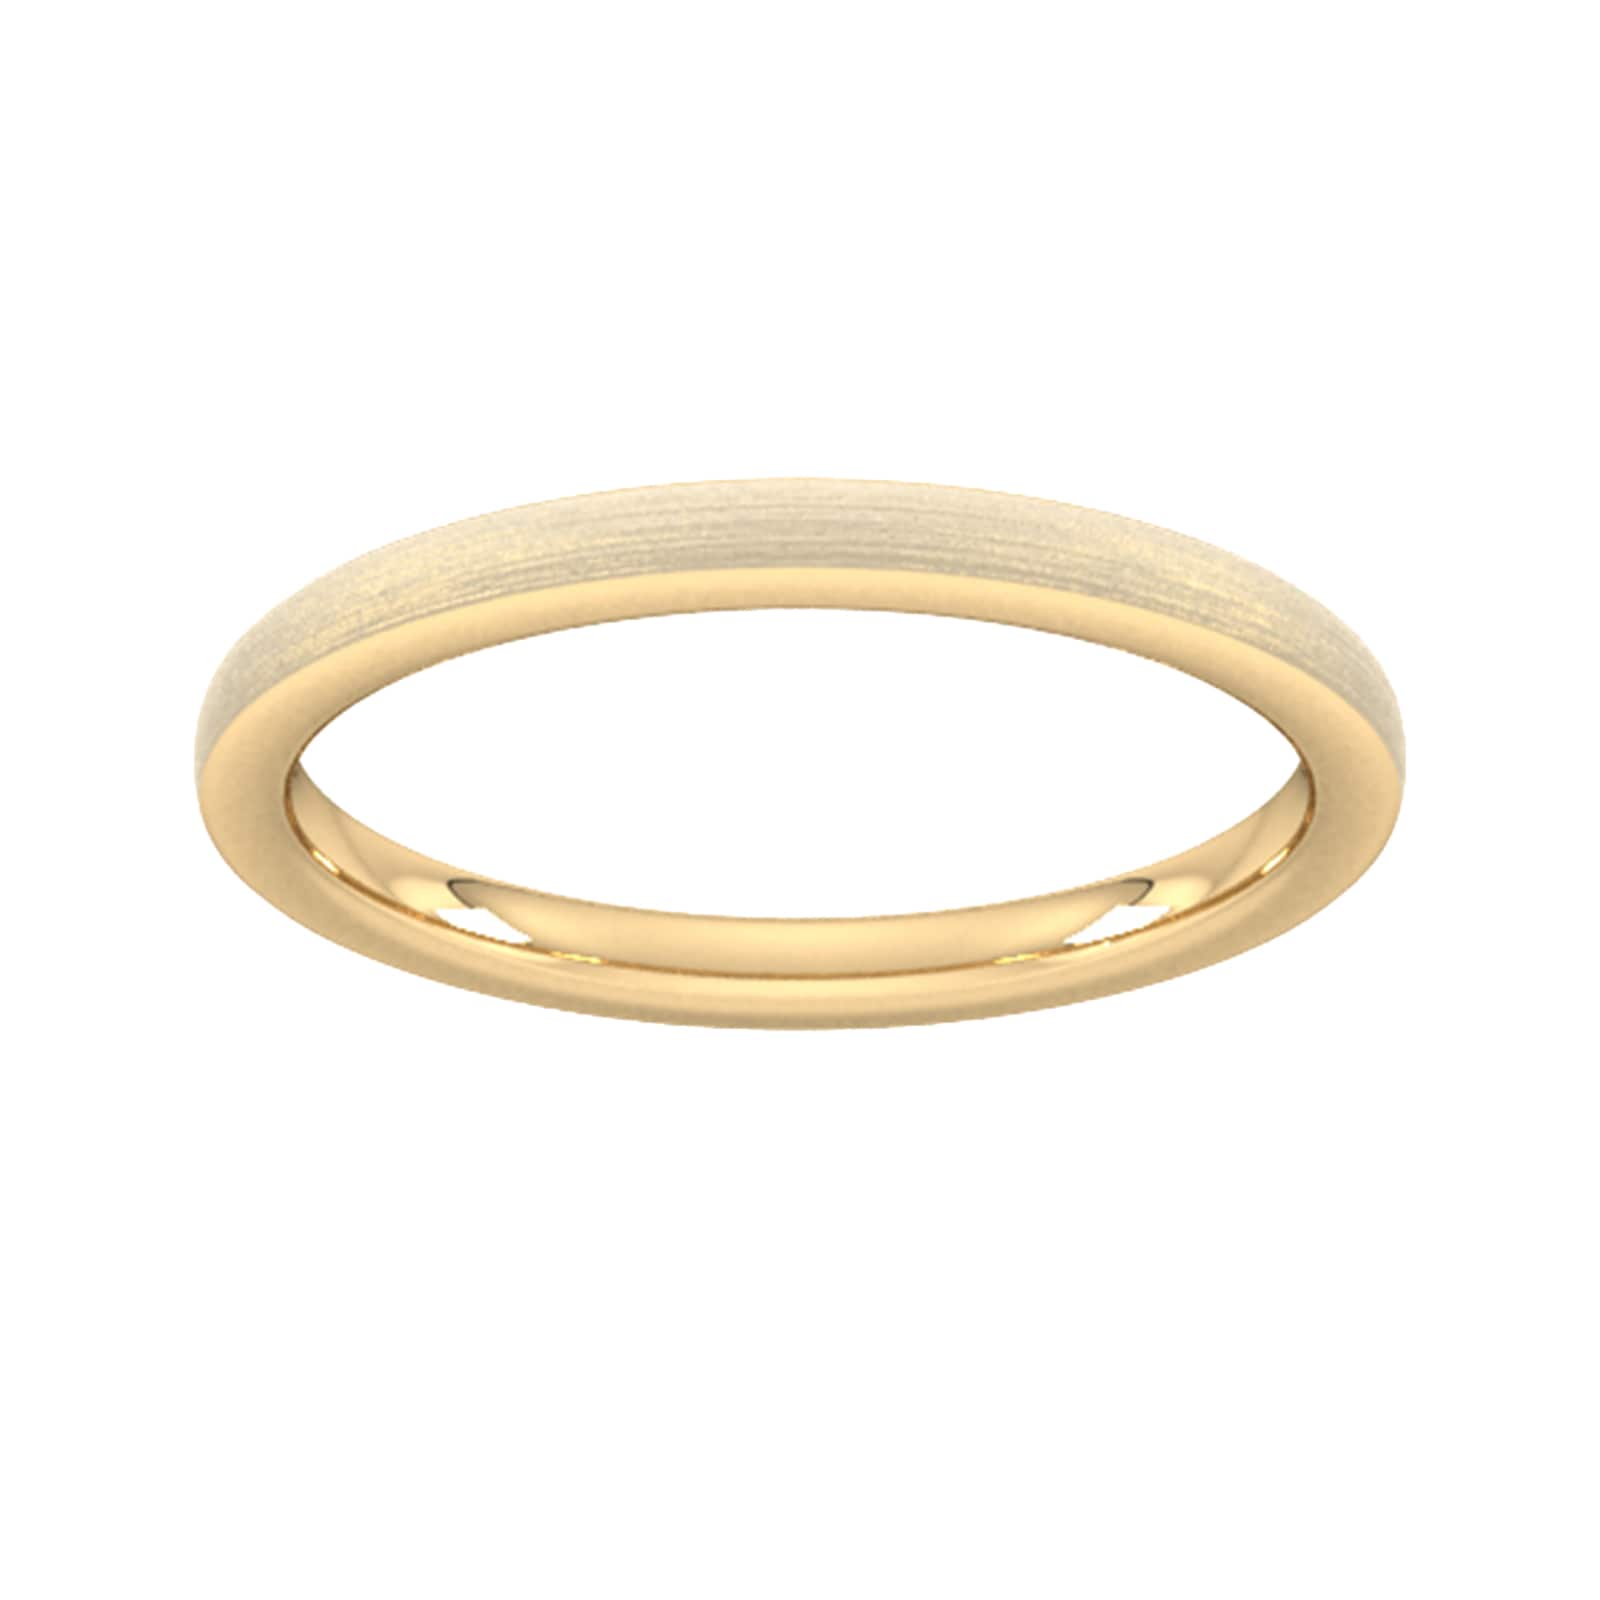 2mm Slight Court Extra Heavy Polished Chamfered Edges With Matt Centre Wedding Ring In 18 Carat Yellow Gold - Ring Size I